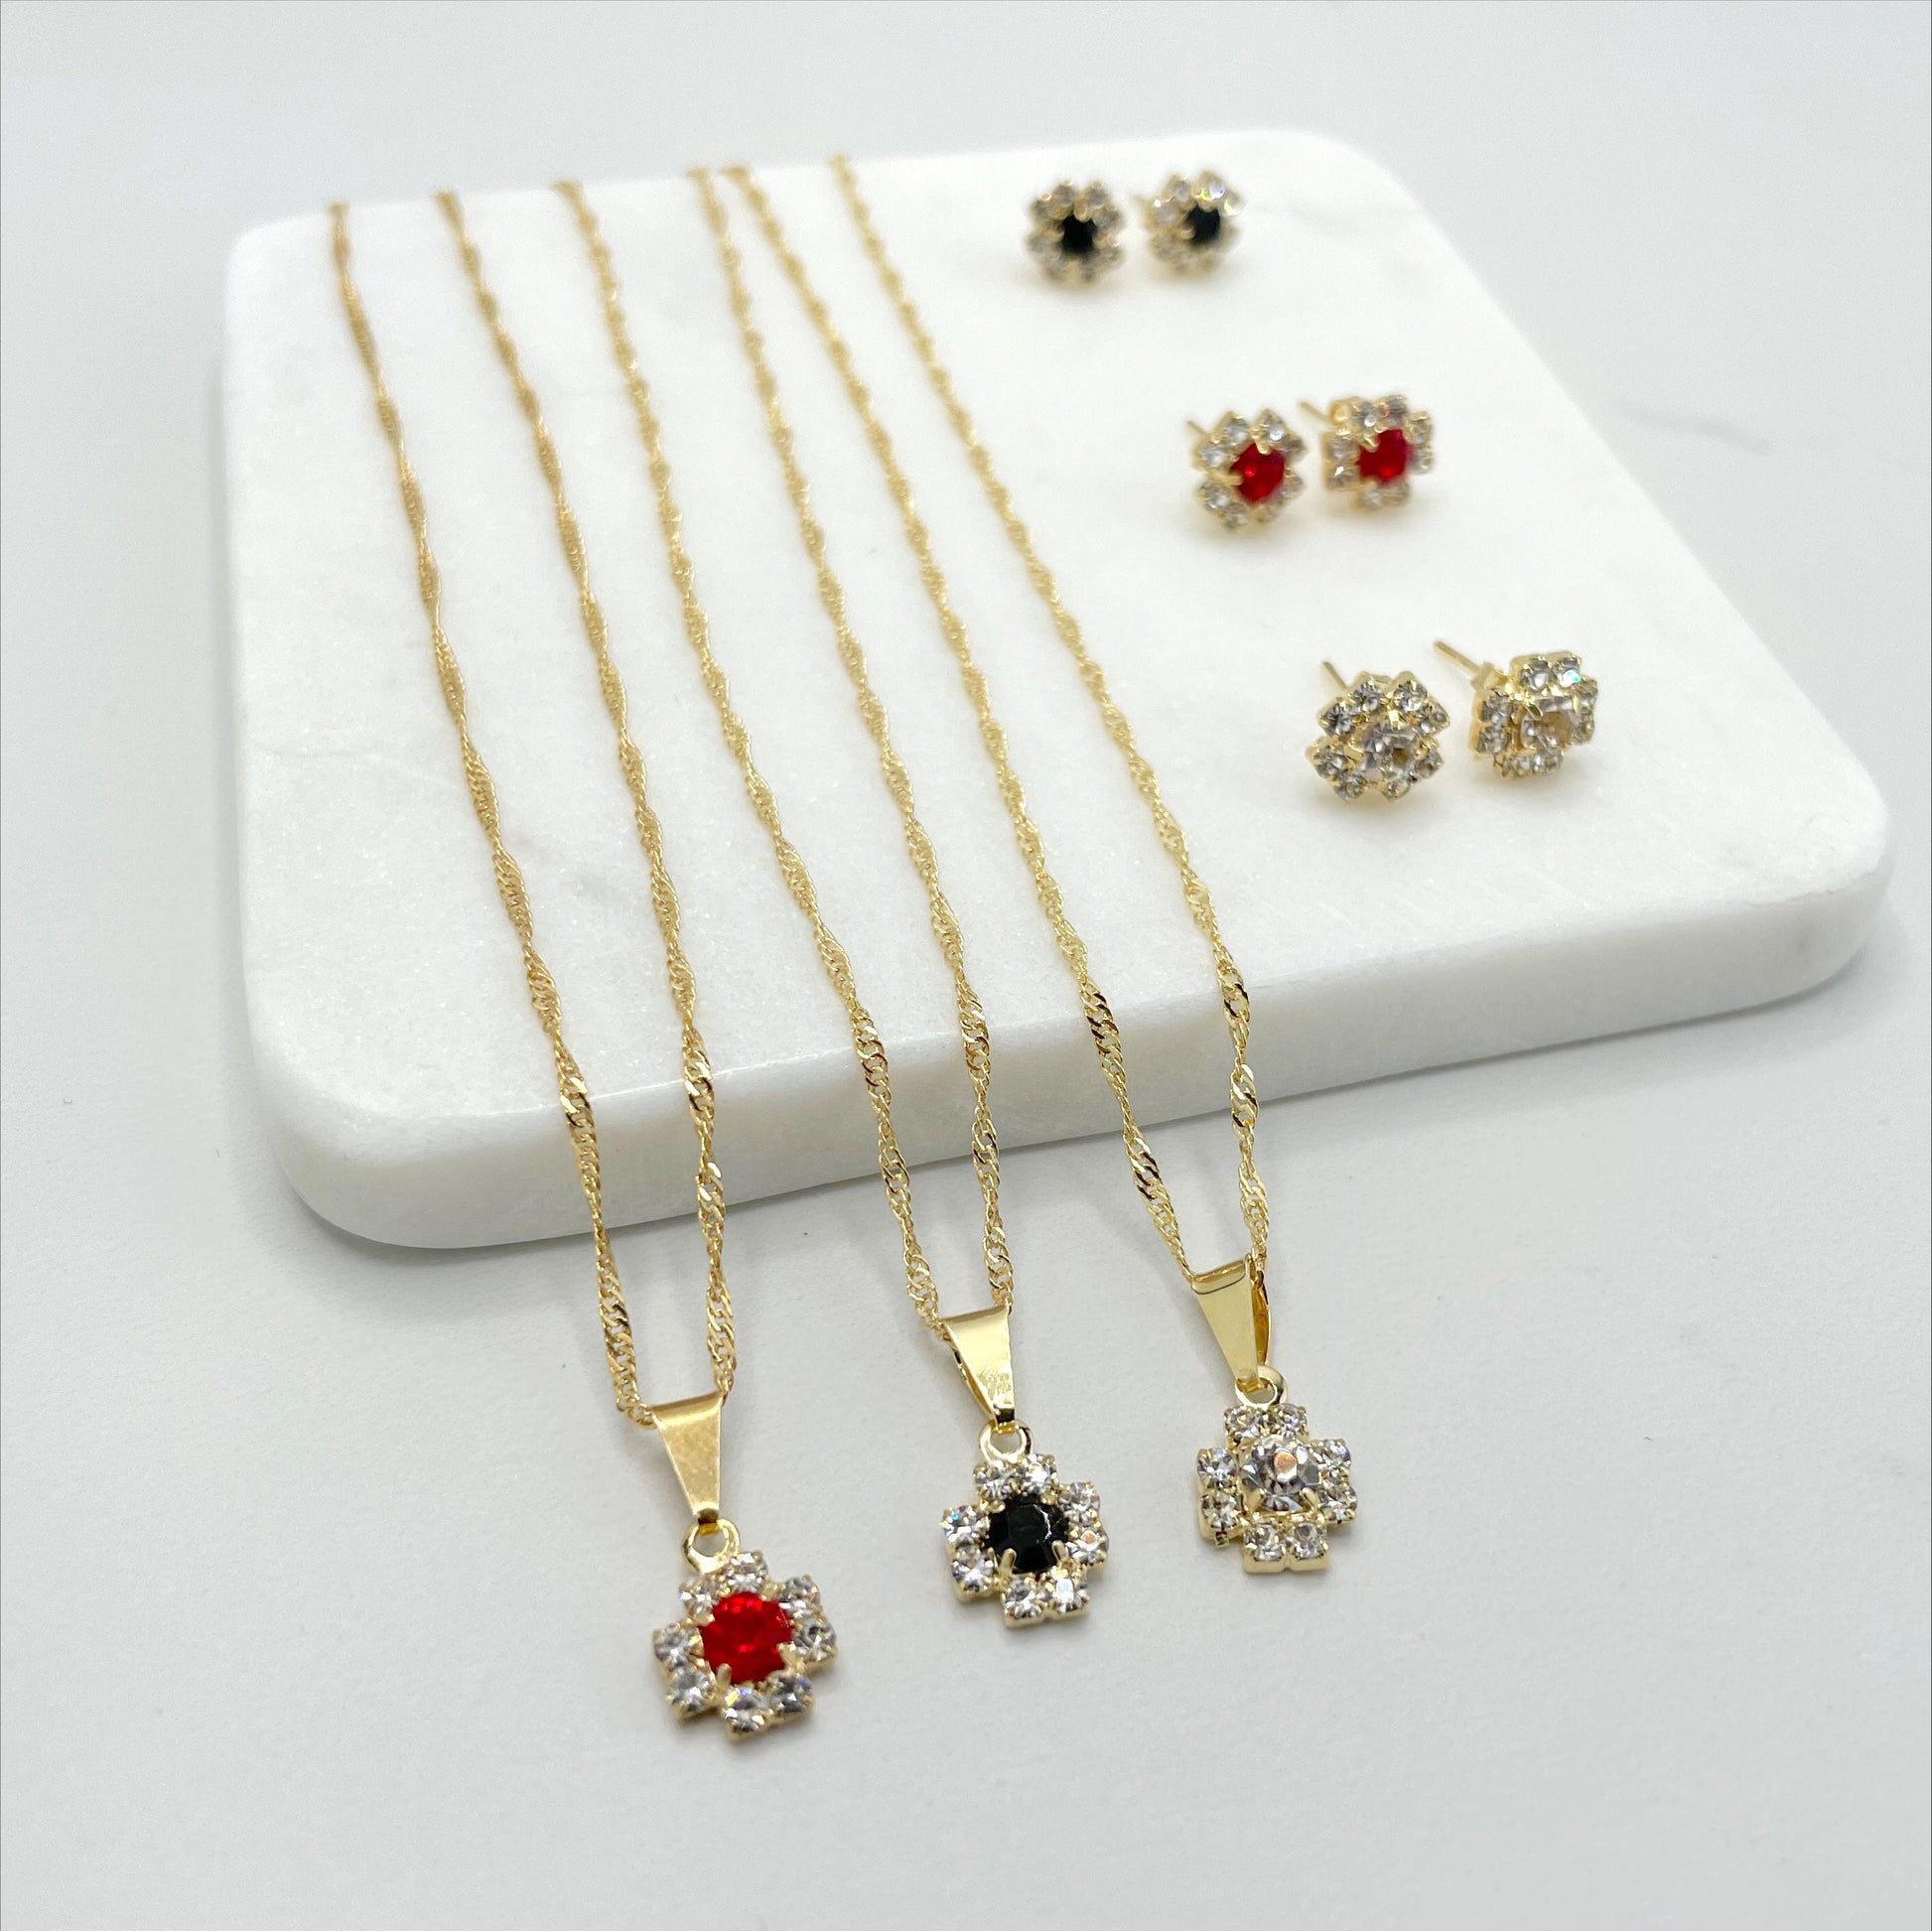 18k Gold Filled 1mm Singapore Chain with Cubic Zirconia White, Red or Black Flower Shape Charms, Necklace & Earrings Set Wholesale Jewelry